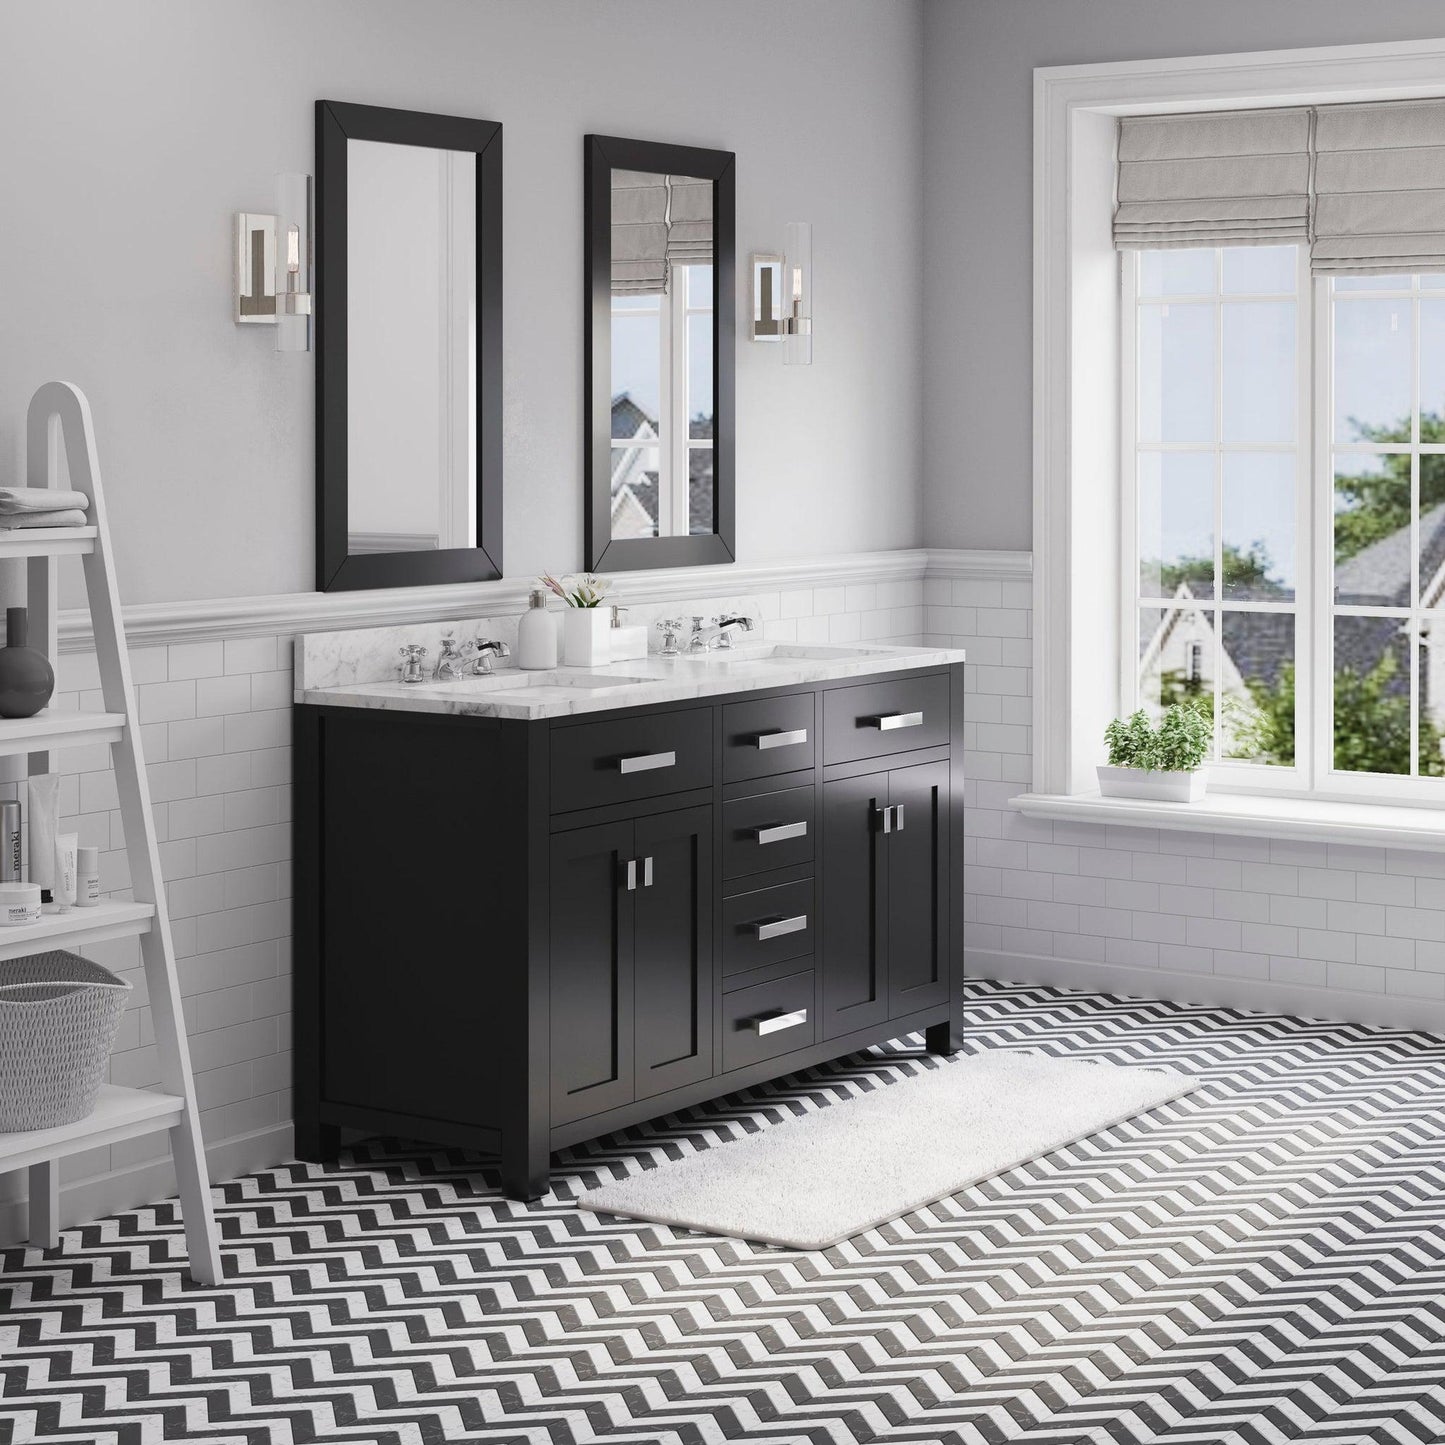 Water Creation Madison 60" Espresso Double Sink Bathroom Vanity With 2 Matching Framed Mirrors And Faucets